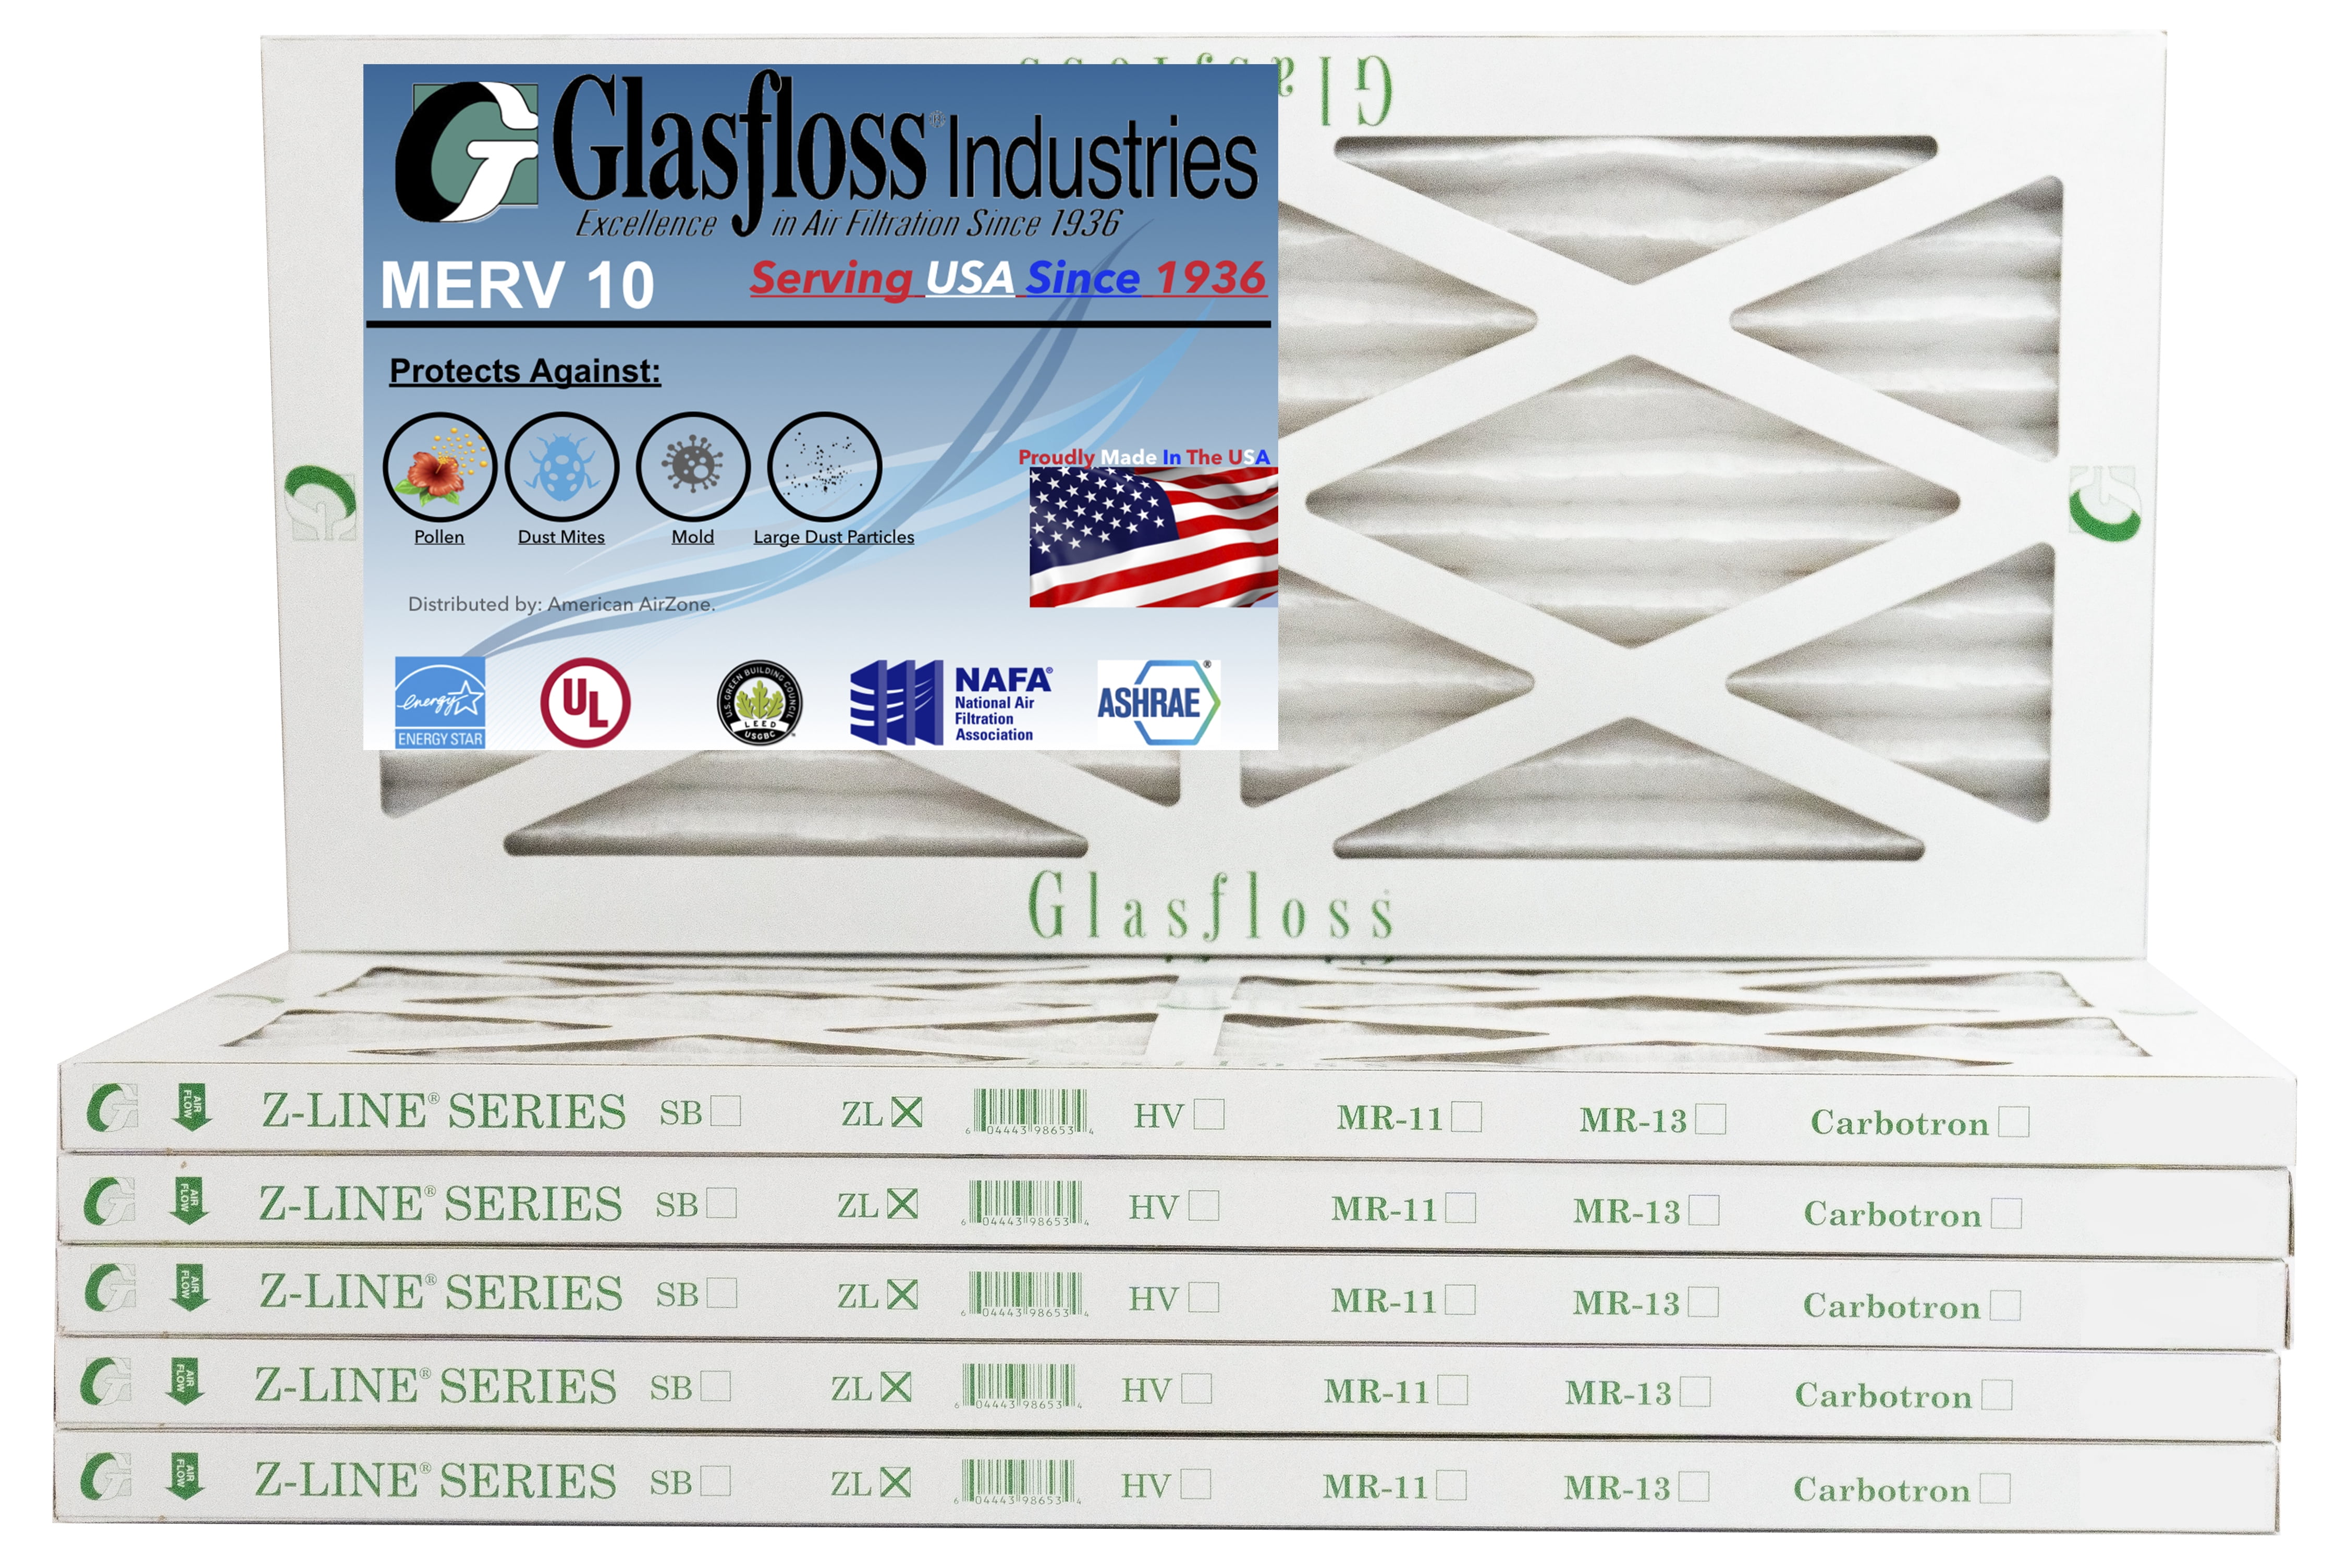 For Home or Office Pack of 12 Furnace Air Filter Made In The USA Glasfloss 16x21x1-1 Inch MERV 10 - Actual Size: 15.5 x 20.5x7/8 Inch - AC or HVAC Pleated Air Filter